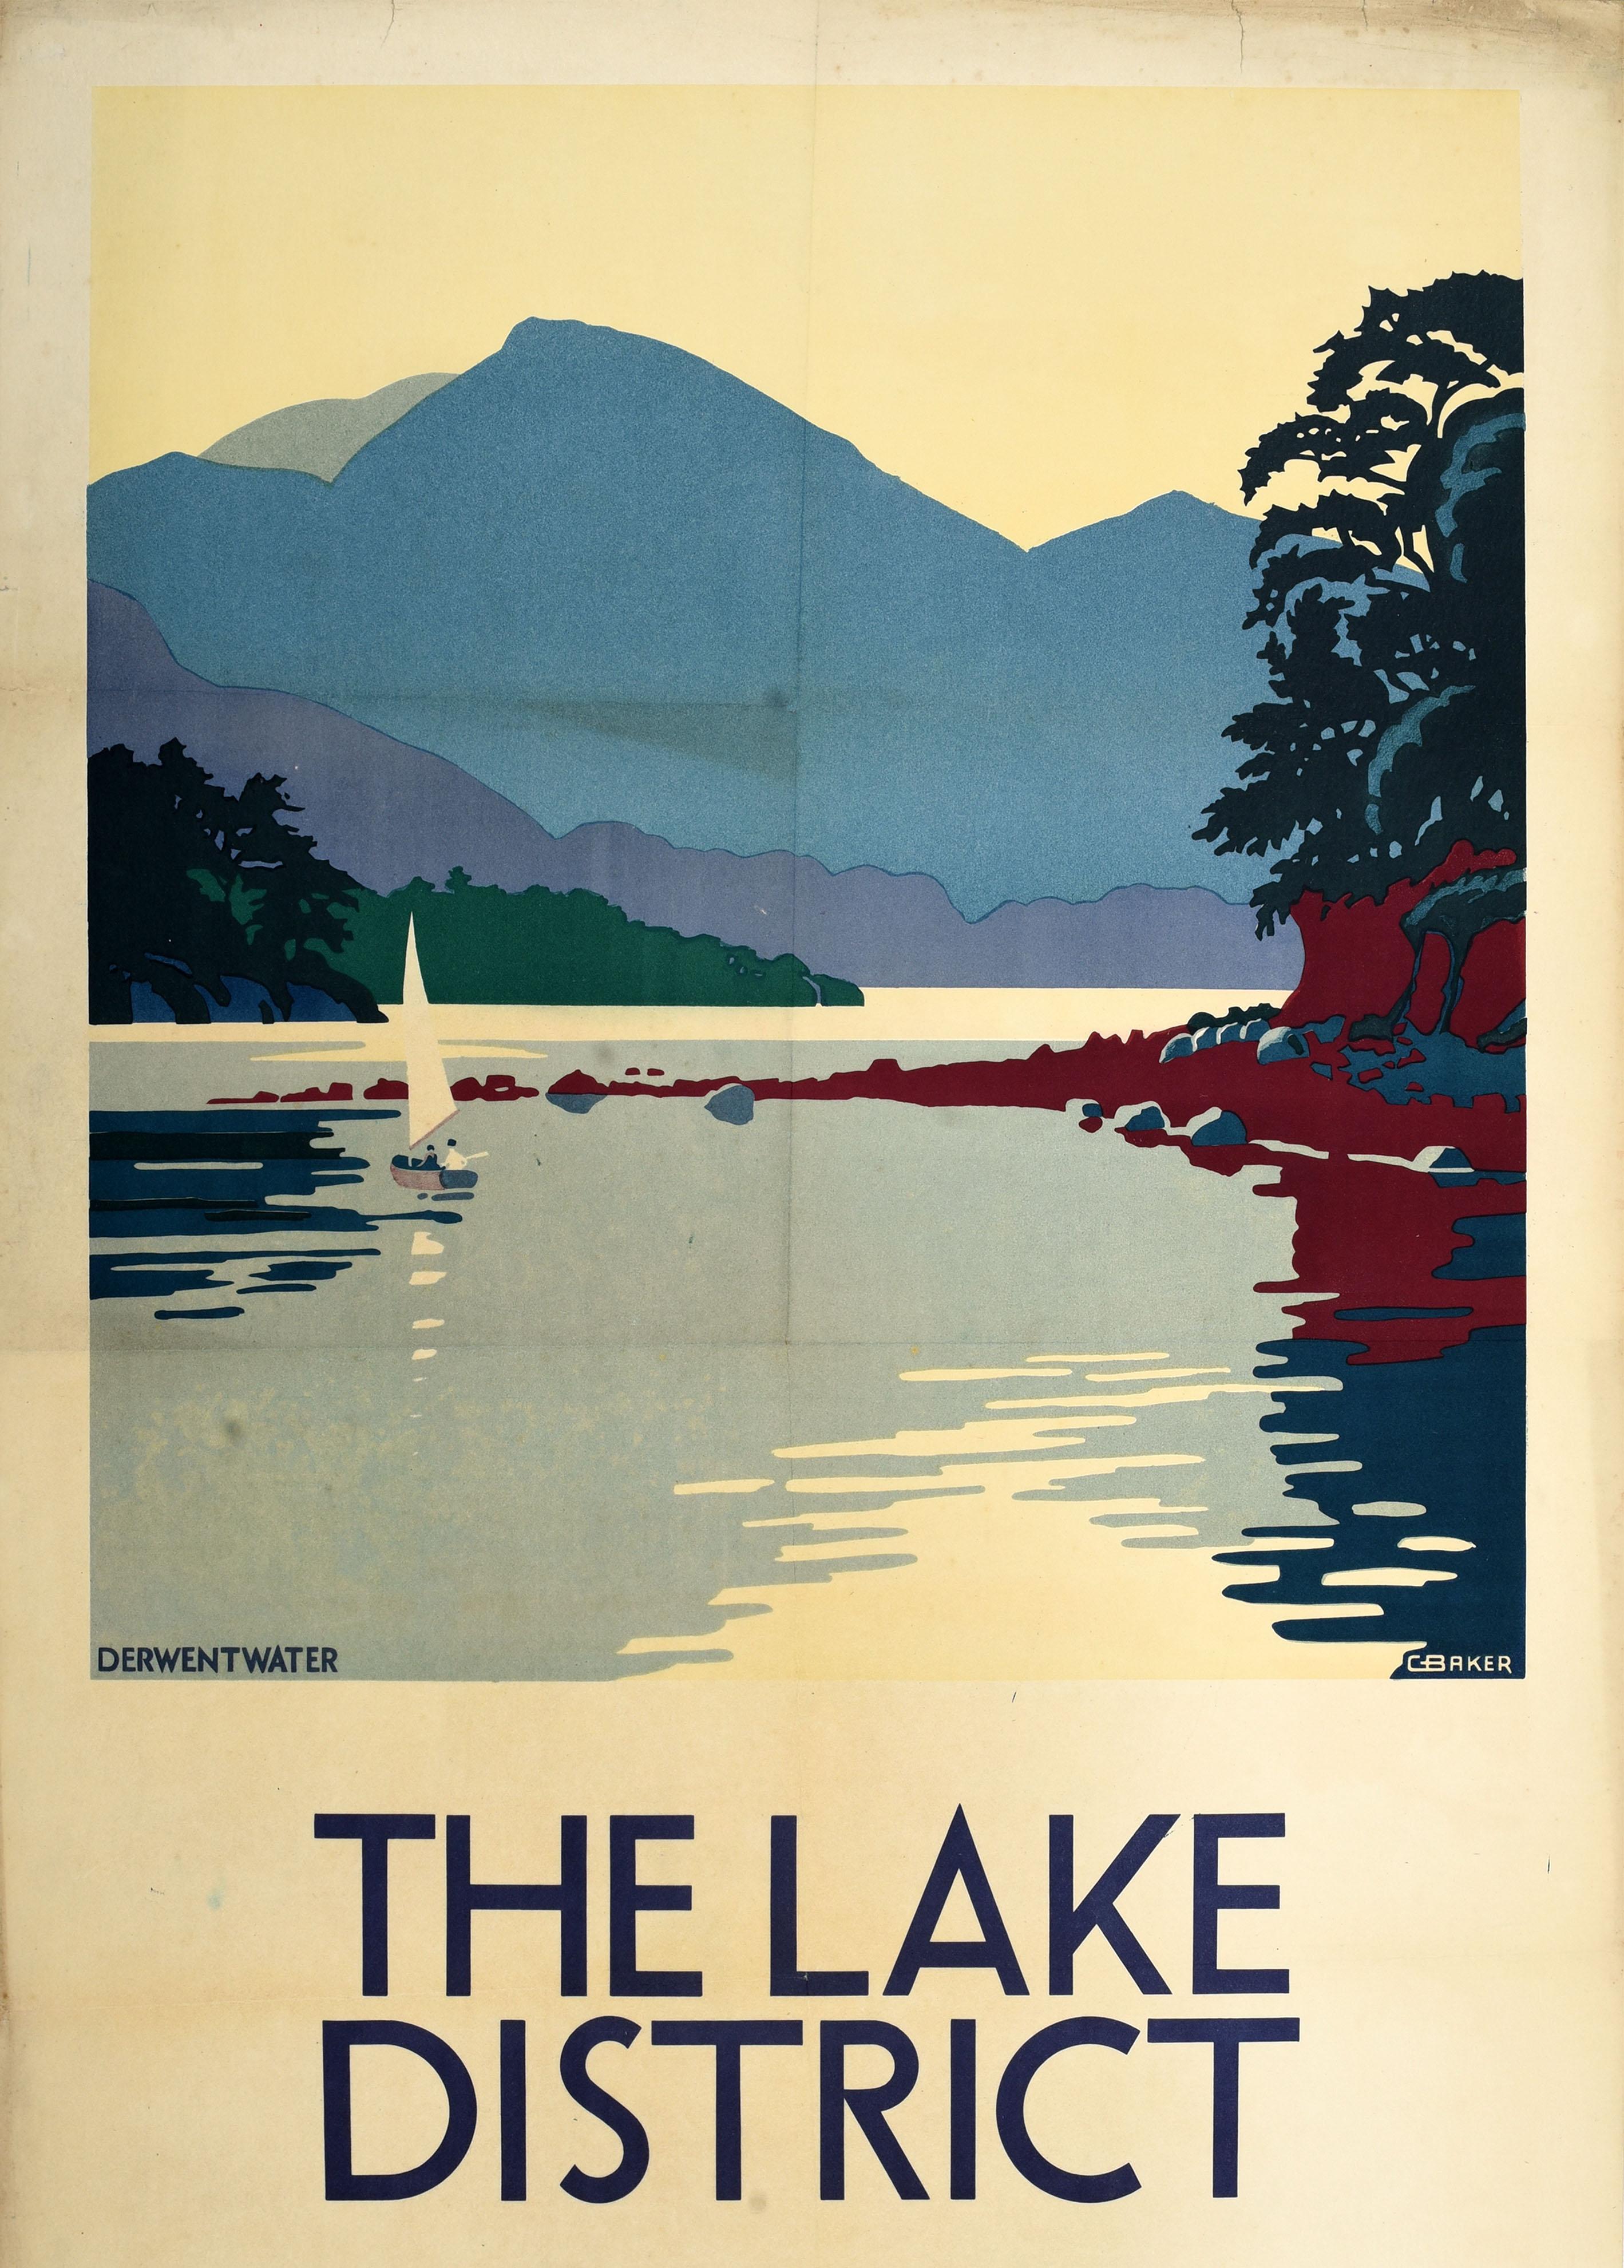 Original vintage LMS London Midland & Scottish railway poster for the Lake District featuring scenic artwork depicting a peaceful view of a sailing boat on Derwentwater with the trees, rocks and hills reflected on the calm water, the title in bold